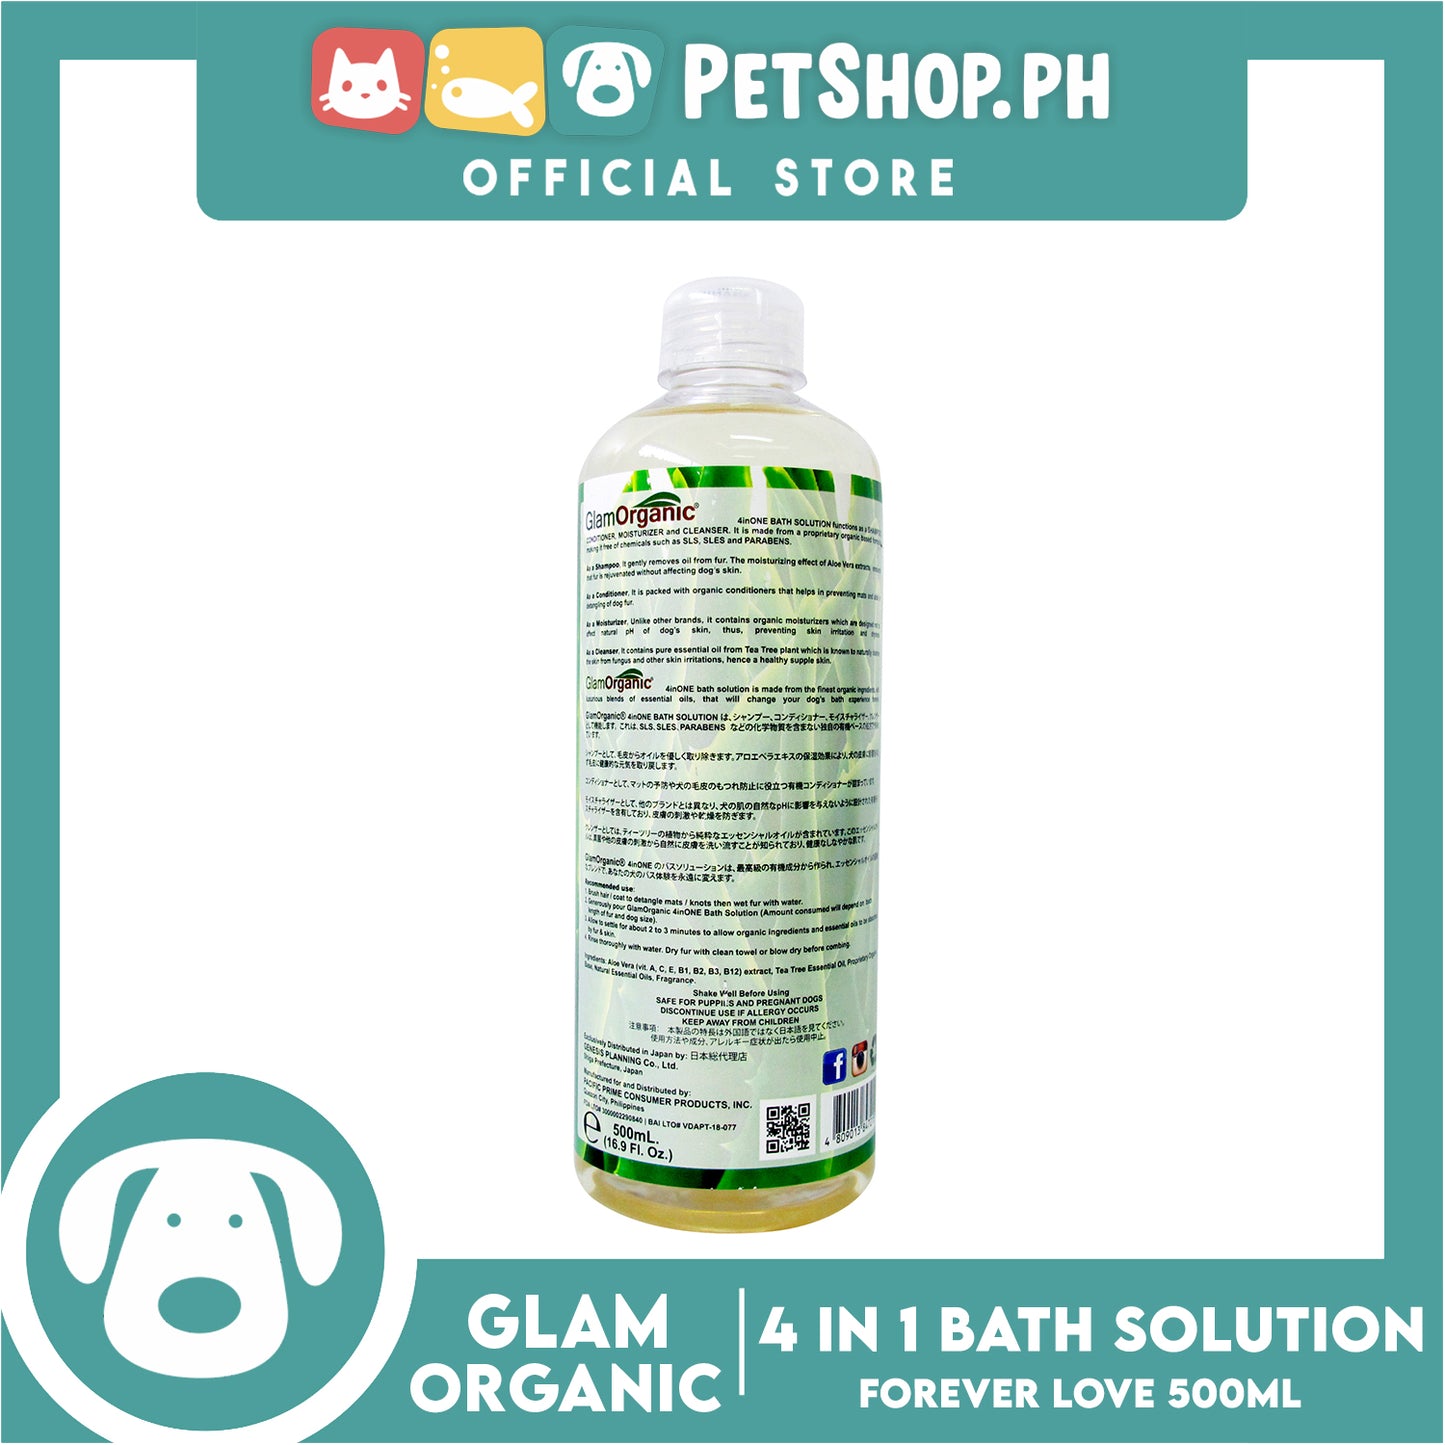 Glam Organic 4 in 1 Bath Solution 100% Organic 500ml (Forever Love) Dog Grooming